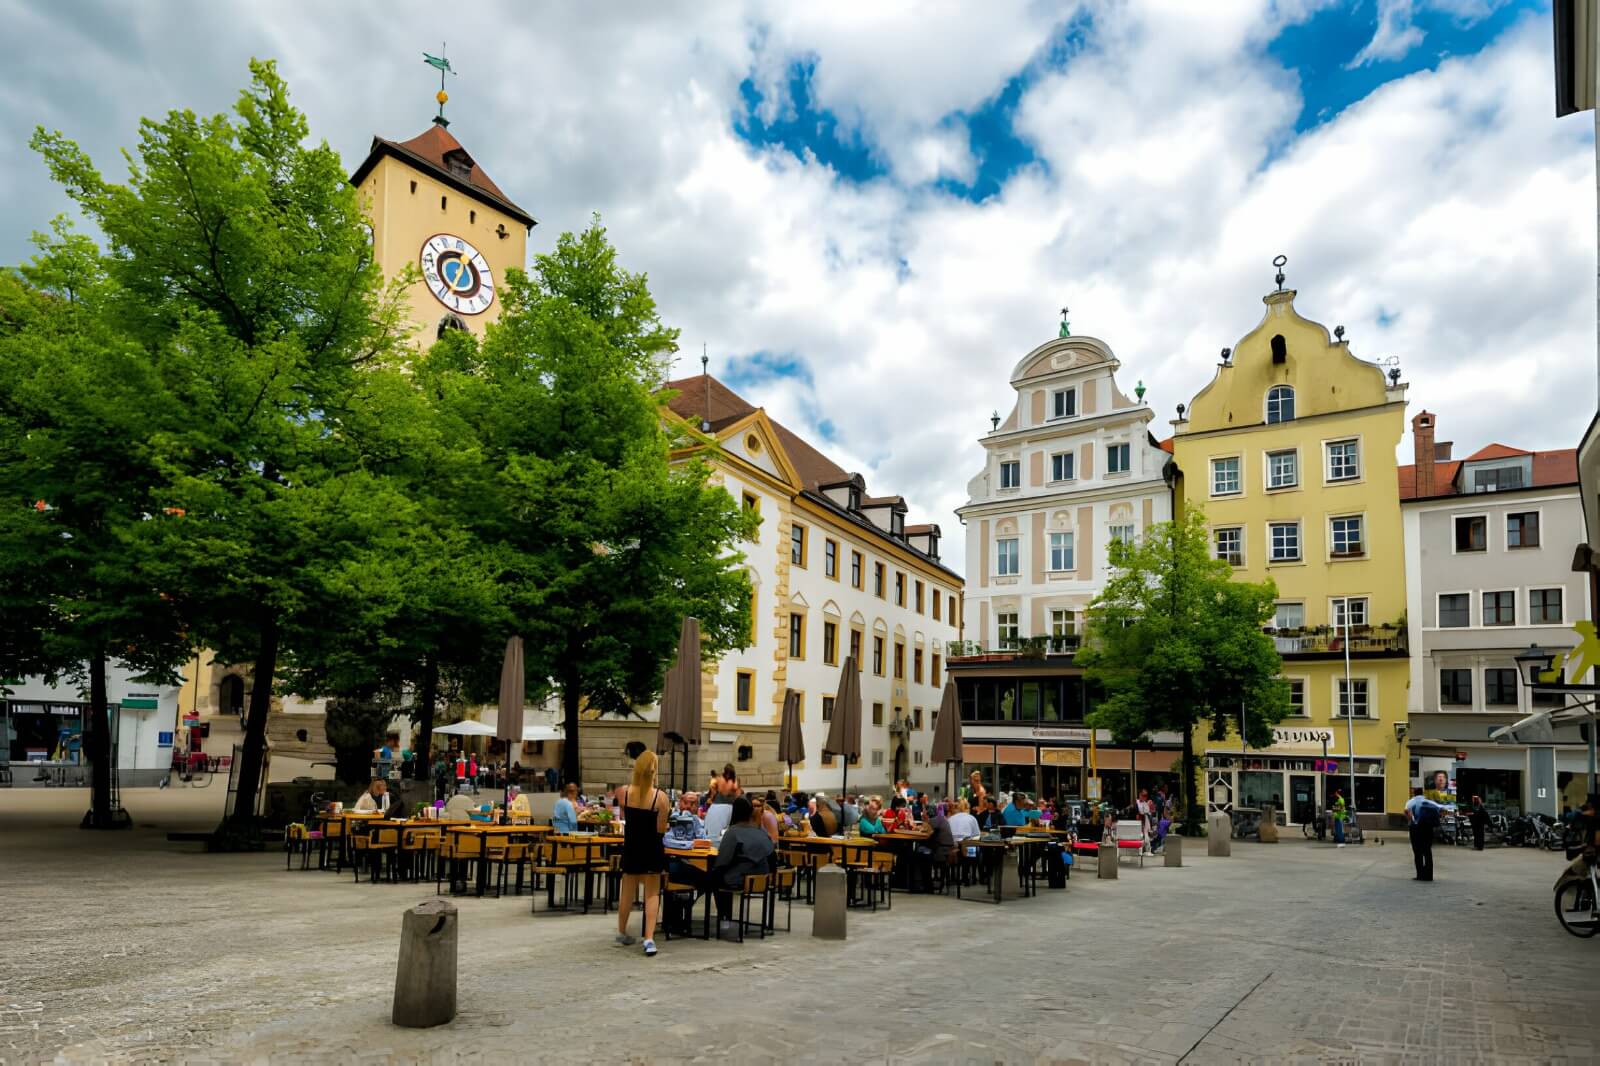 here are some list of must see in regensburg, germany